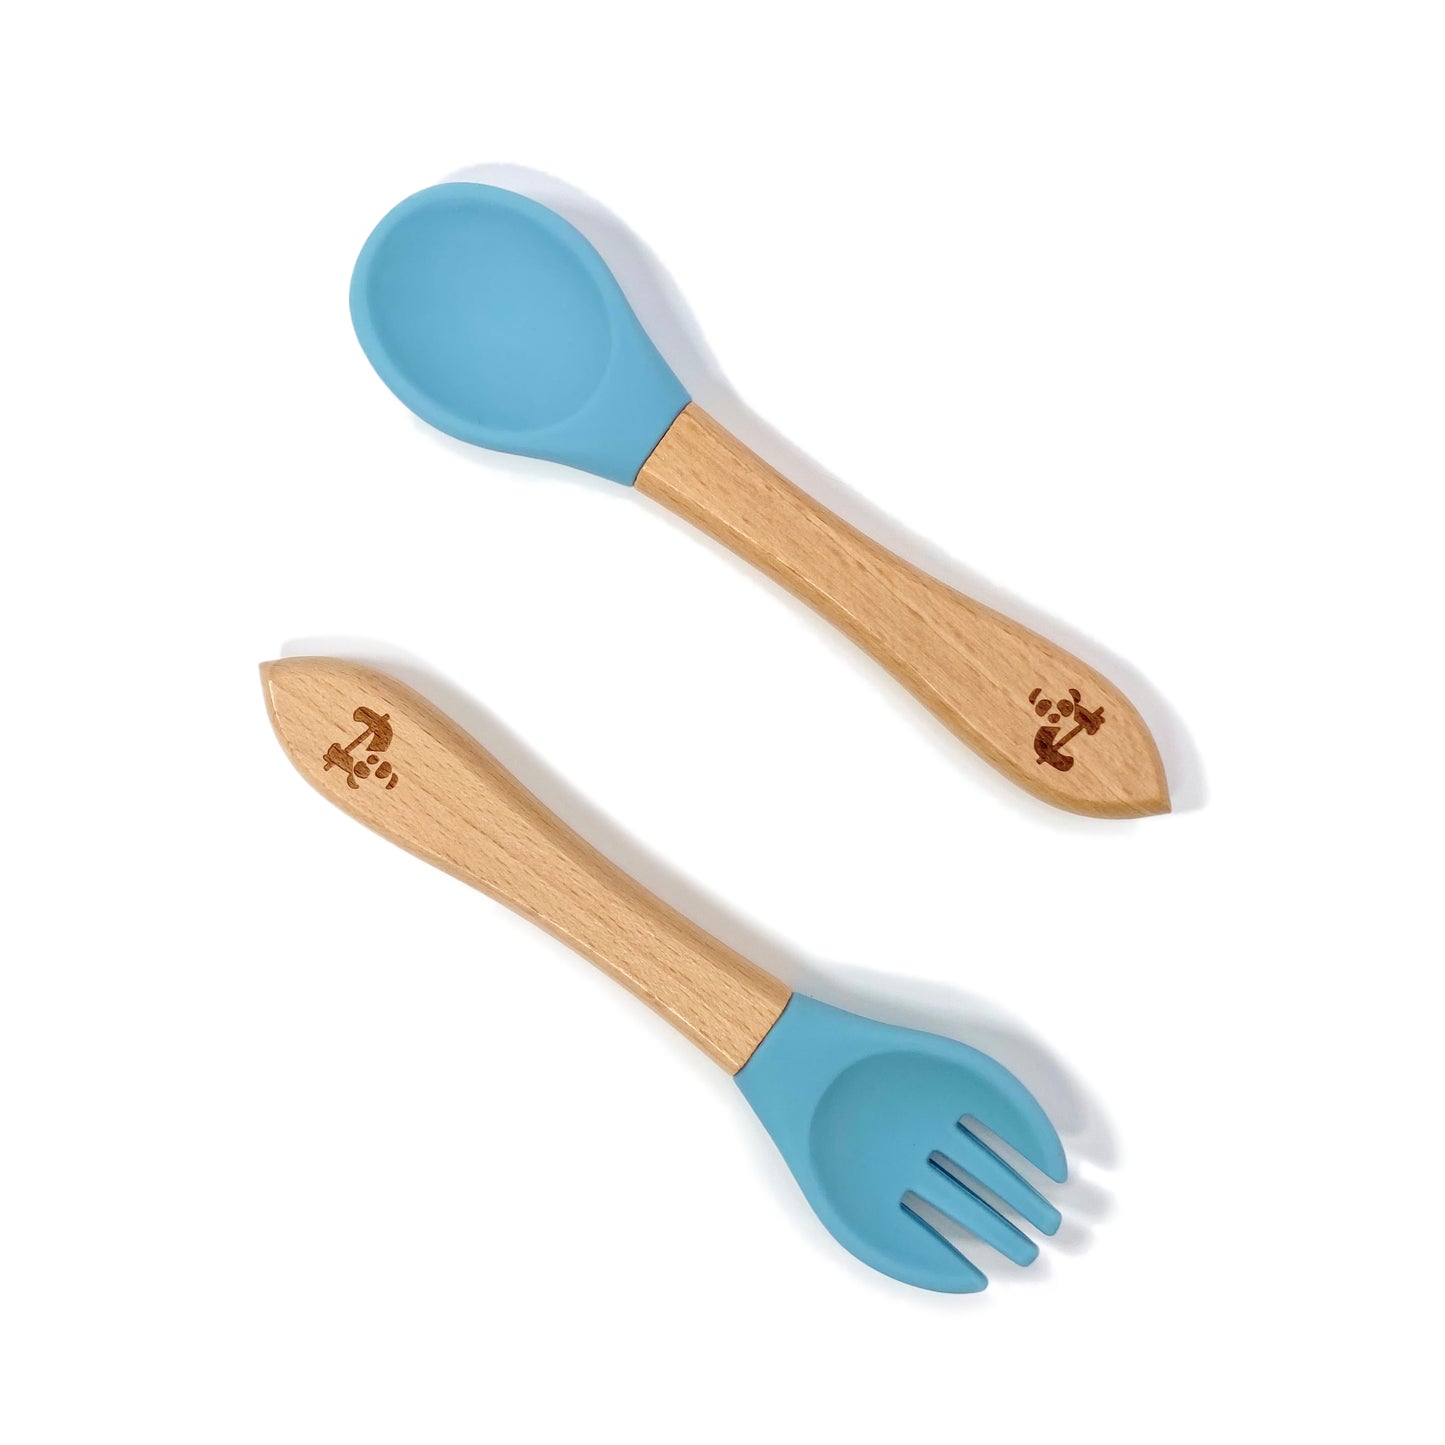 A set of children’s bamboo and silicone cutlery, in sky blue colour.